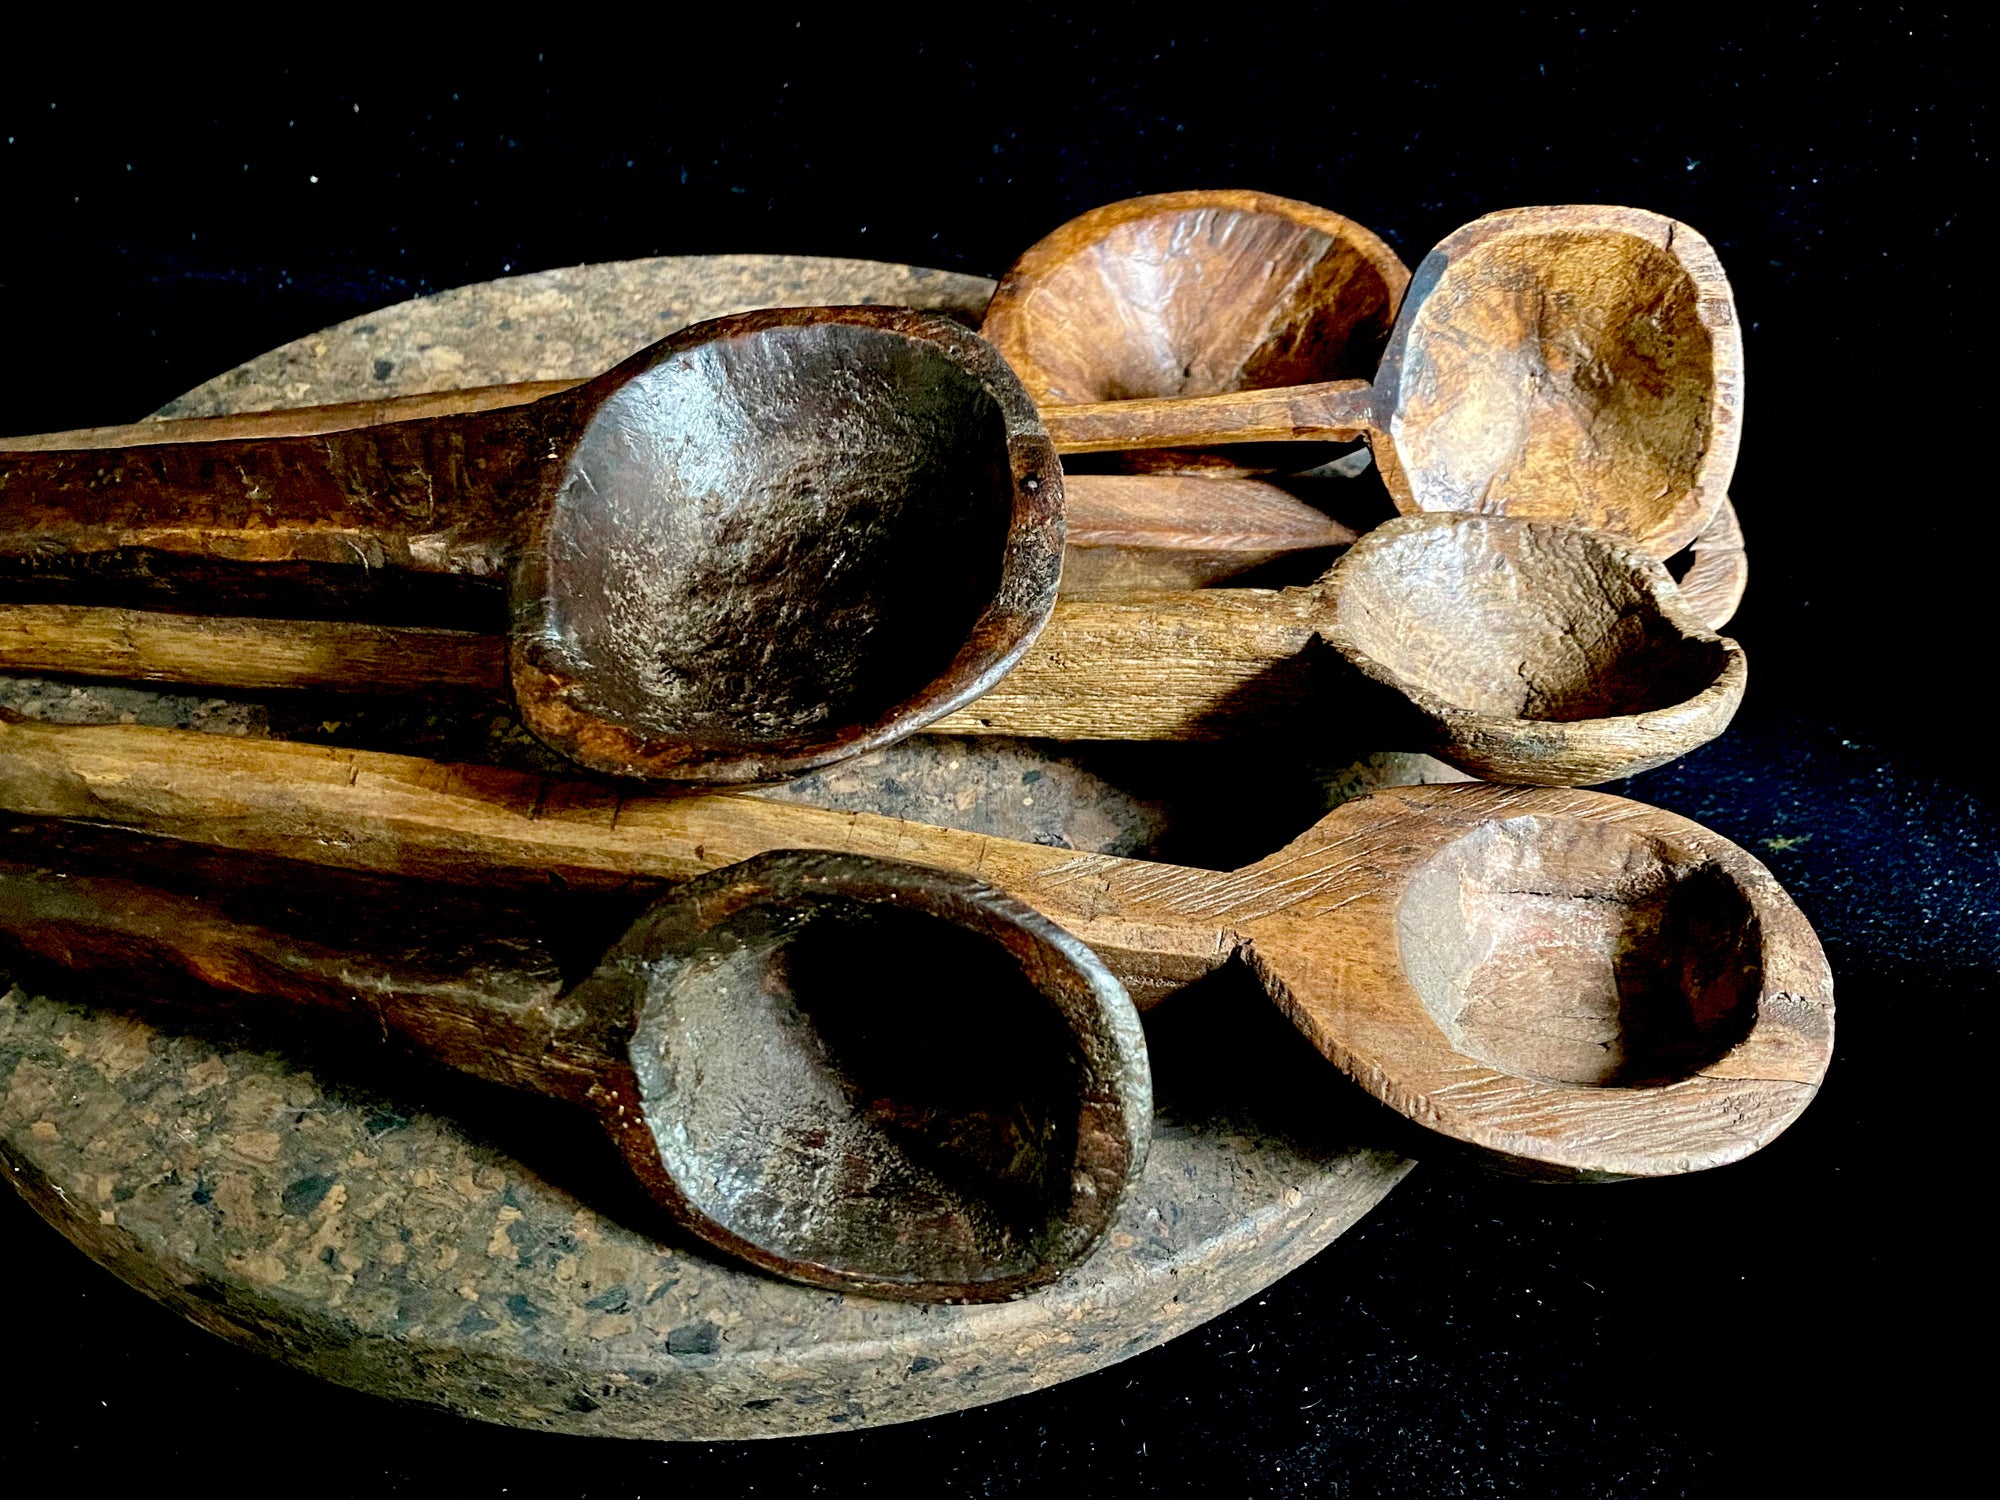 Vintage wood serving spoons or ladle, often used to serve dhal and biriyani dishes. Hand carved hardwood, mostly teak. From northern India. Our spoons have a lovely worn patina commensurate with their age. Each piece is hand carved, unique and artisan made. Measurements: length 35-40 cm, width of spoons 7-9 cm.